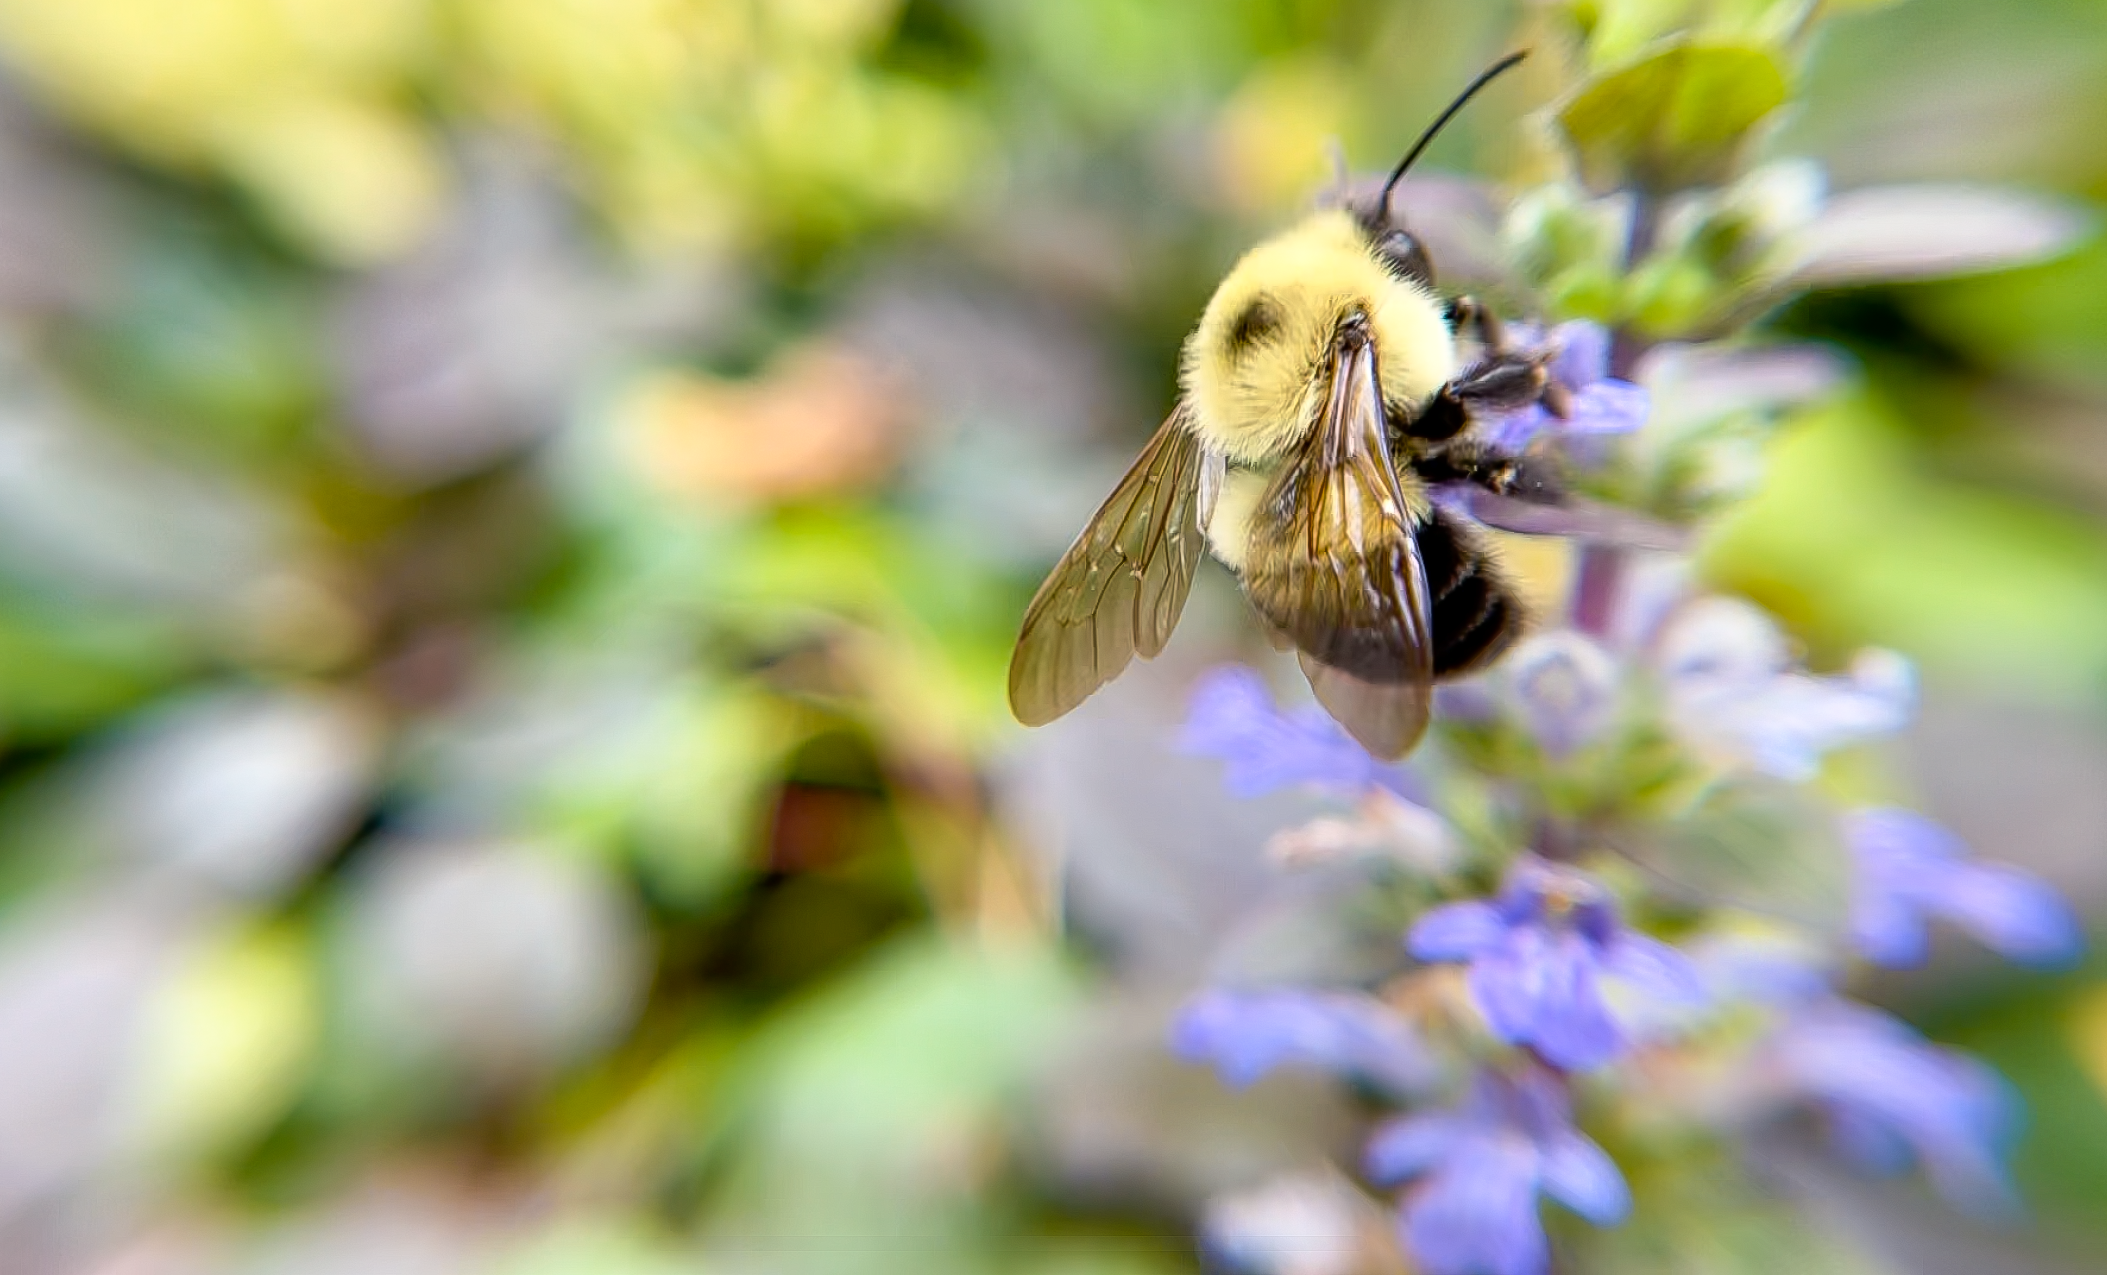 Koch captured this bumblebee visiting flowers.